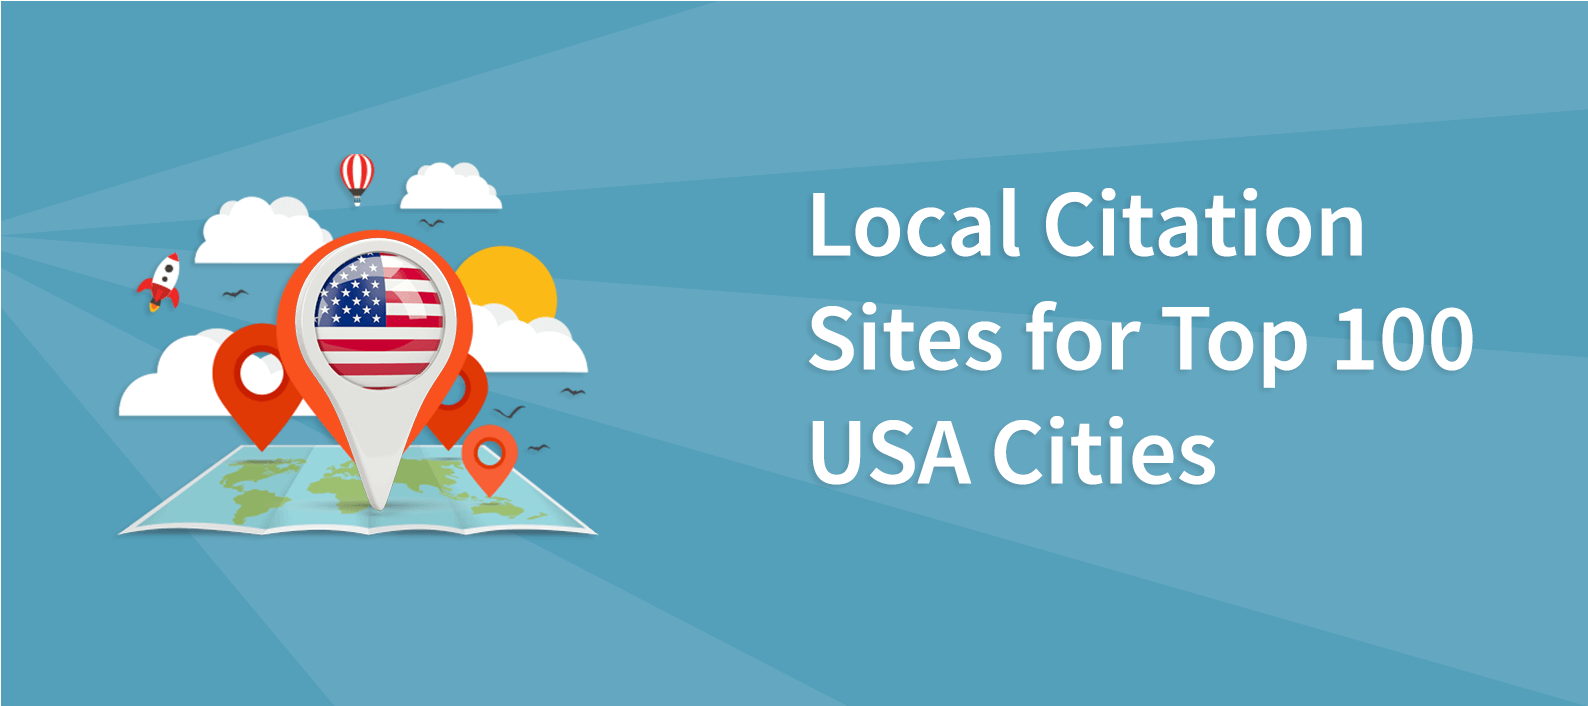 Local Citation Sites for Top 100 US Cities | USA City Citations